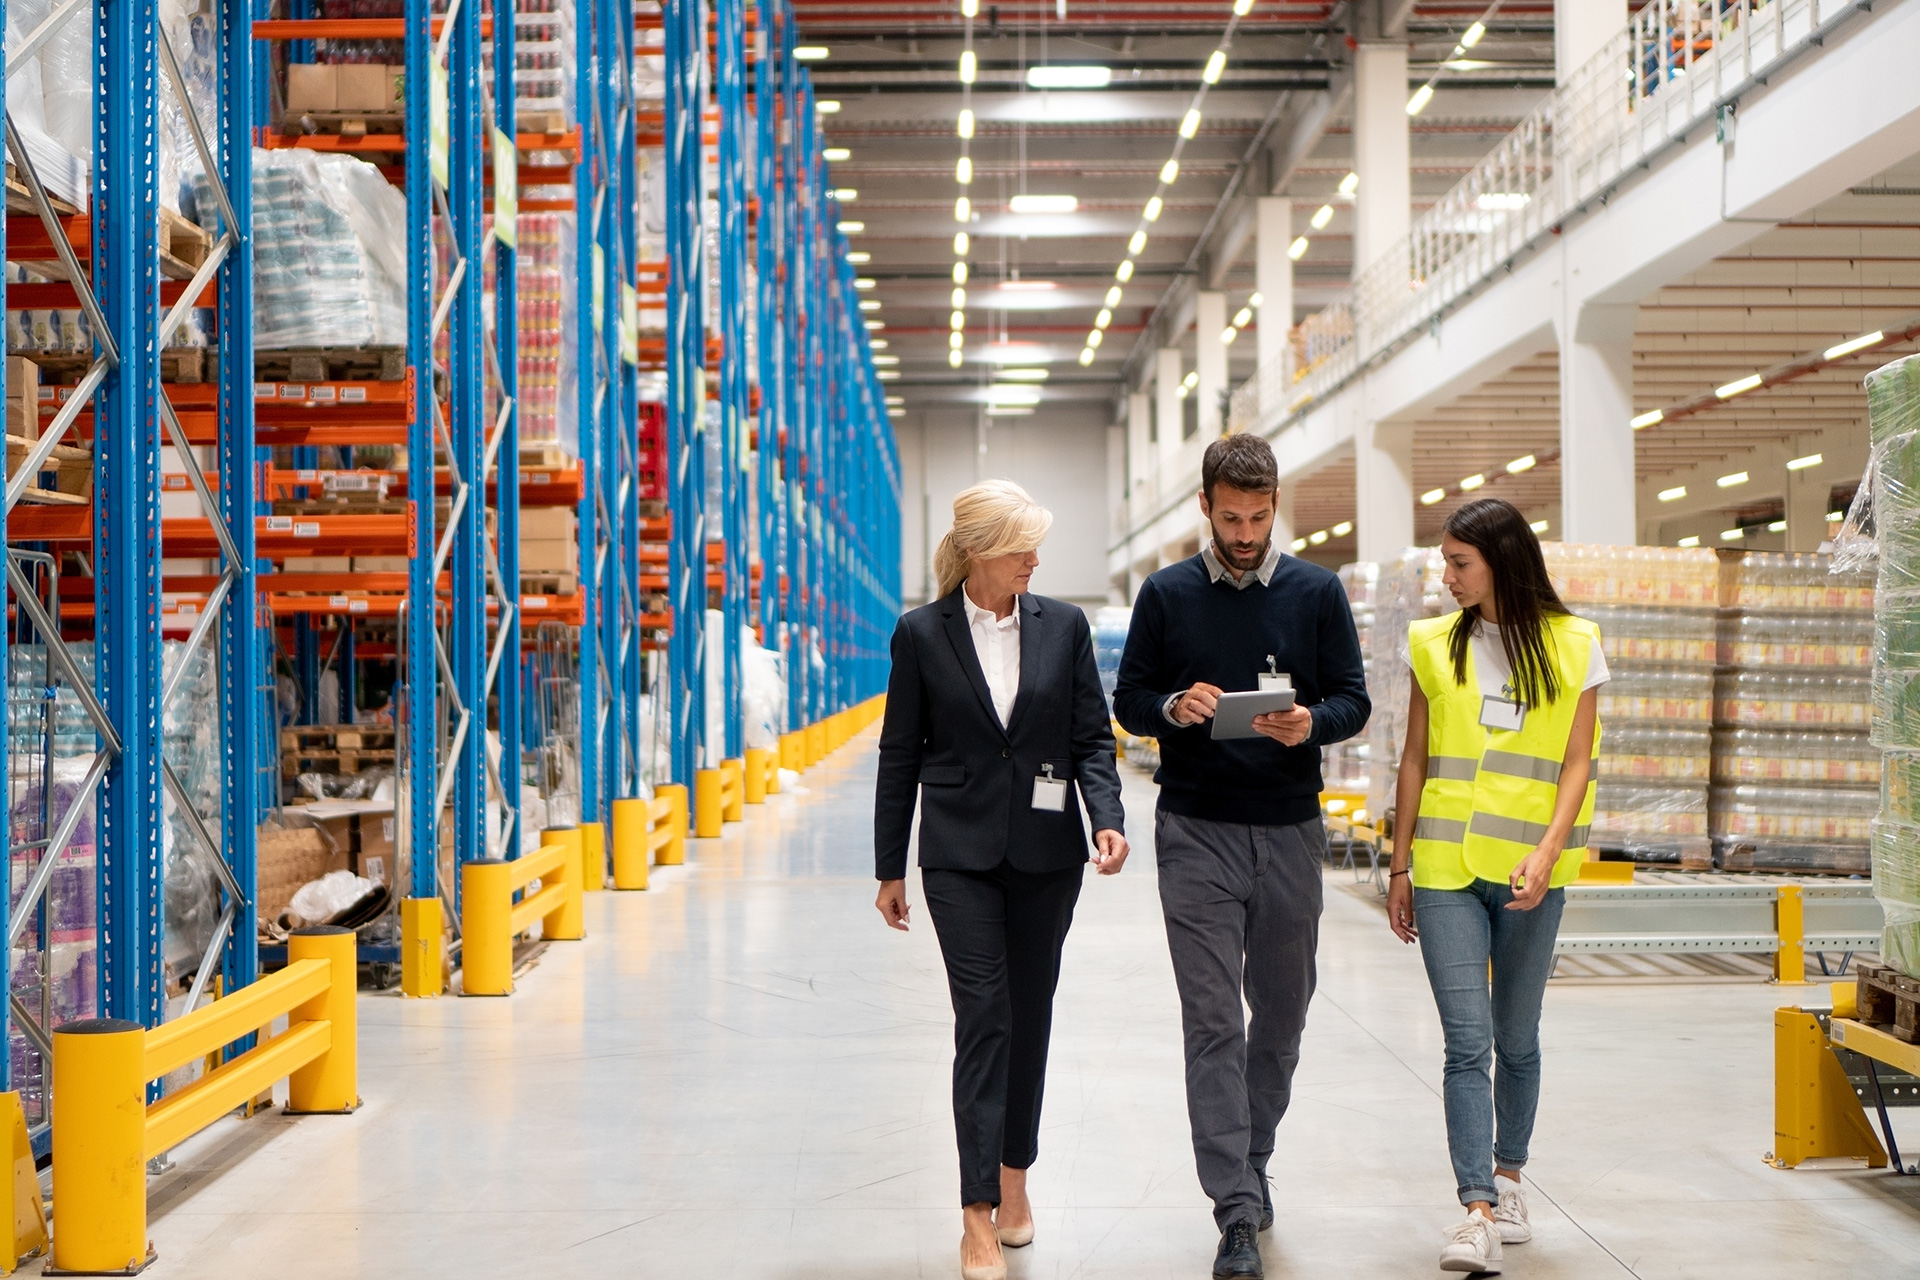 Supplier collaboration, inventory check